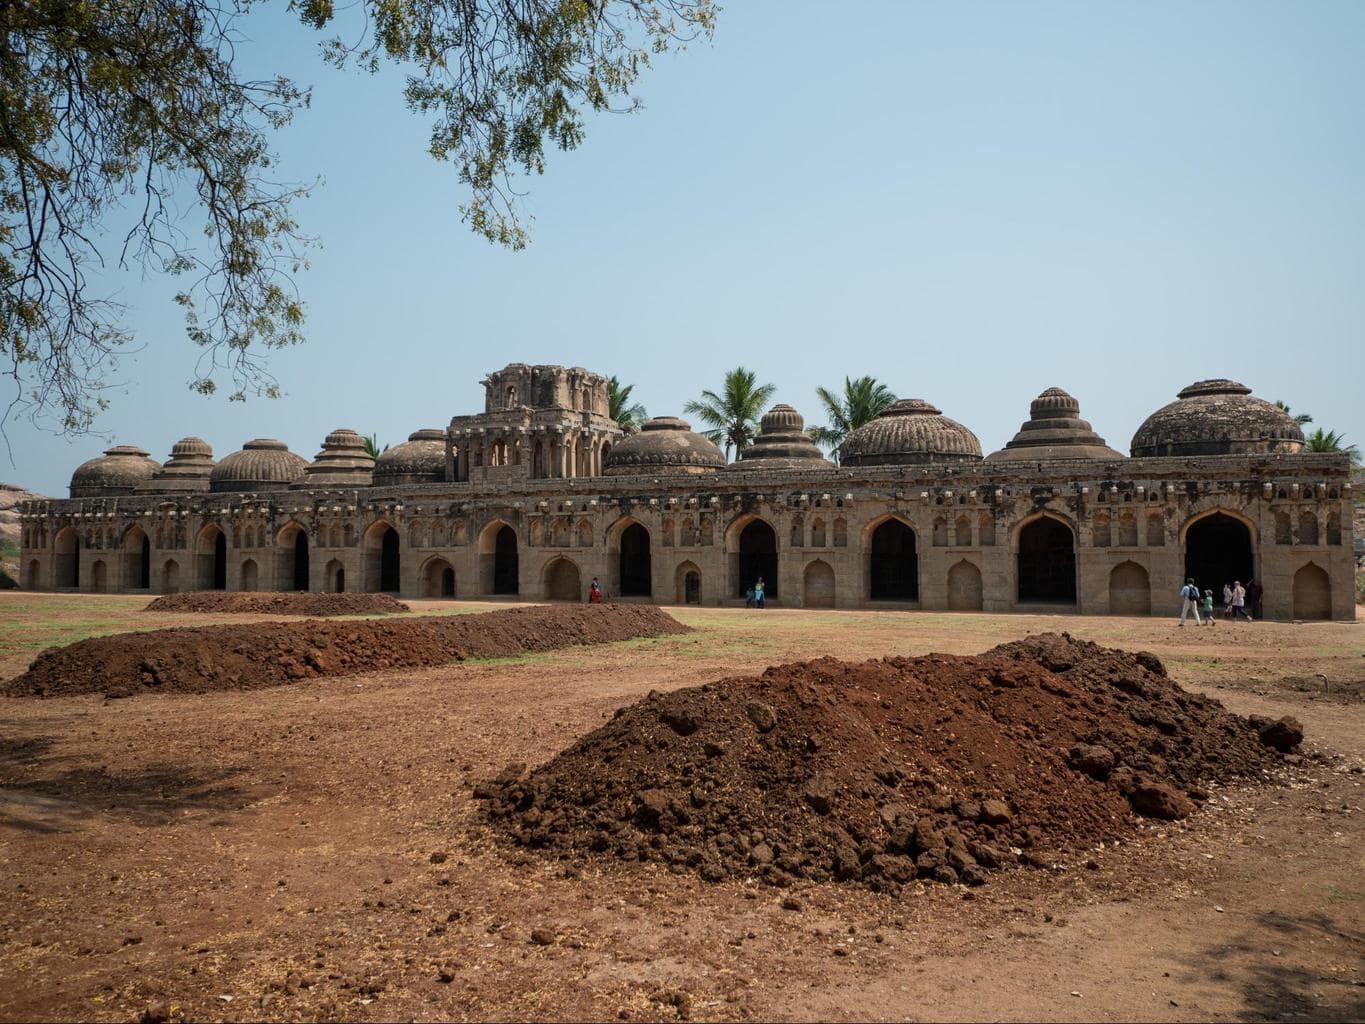 Elephant stables in Hampi